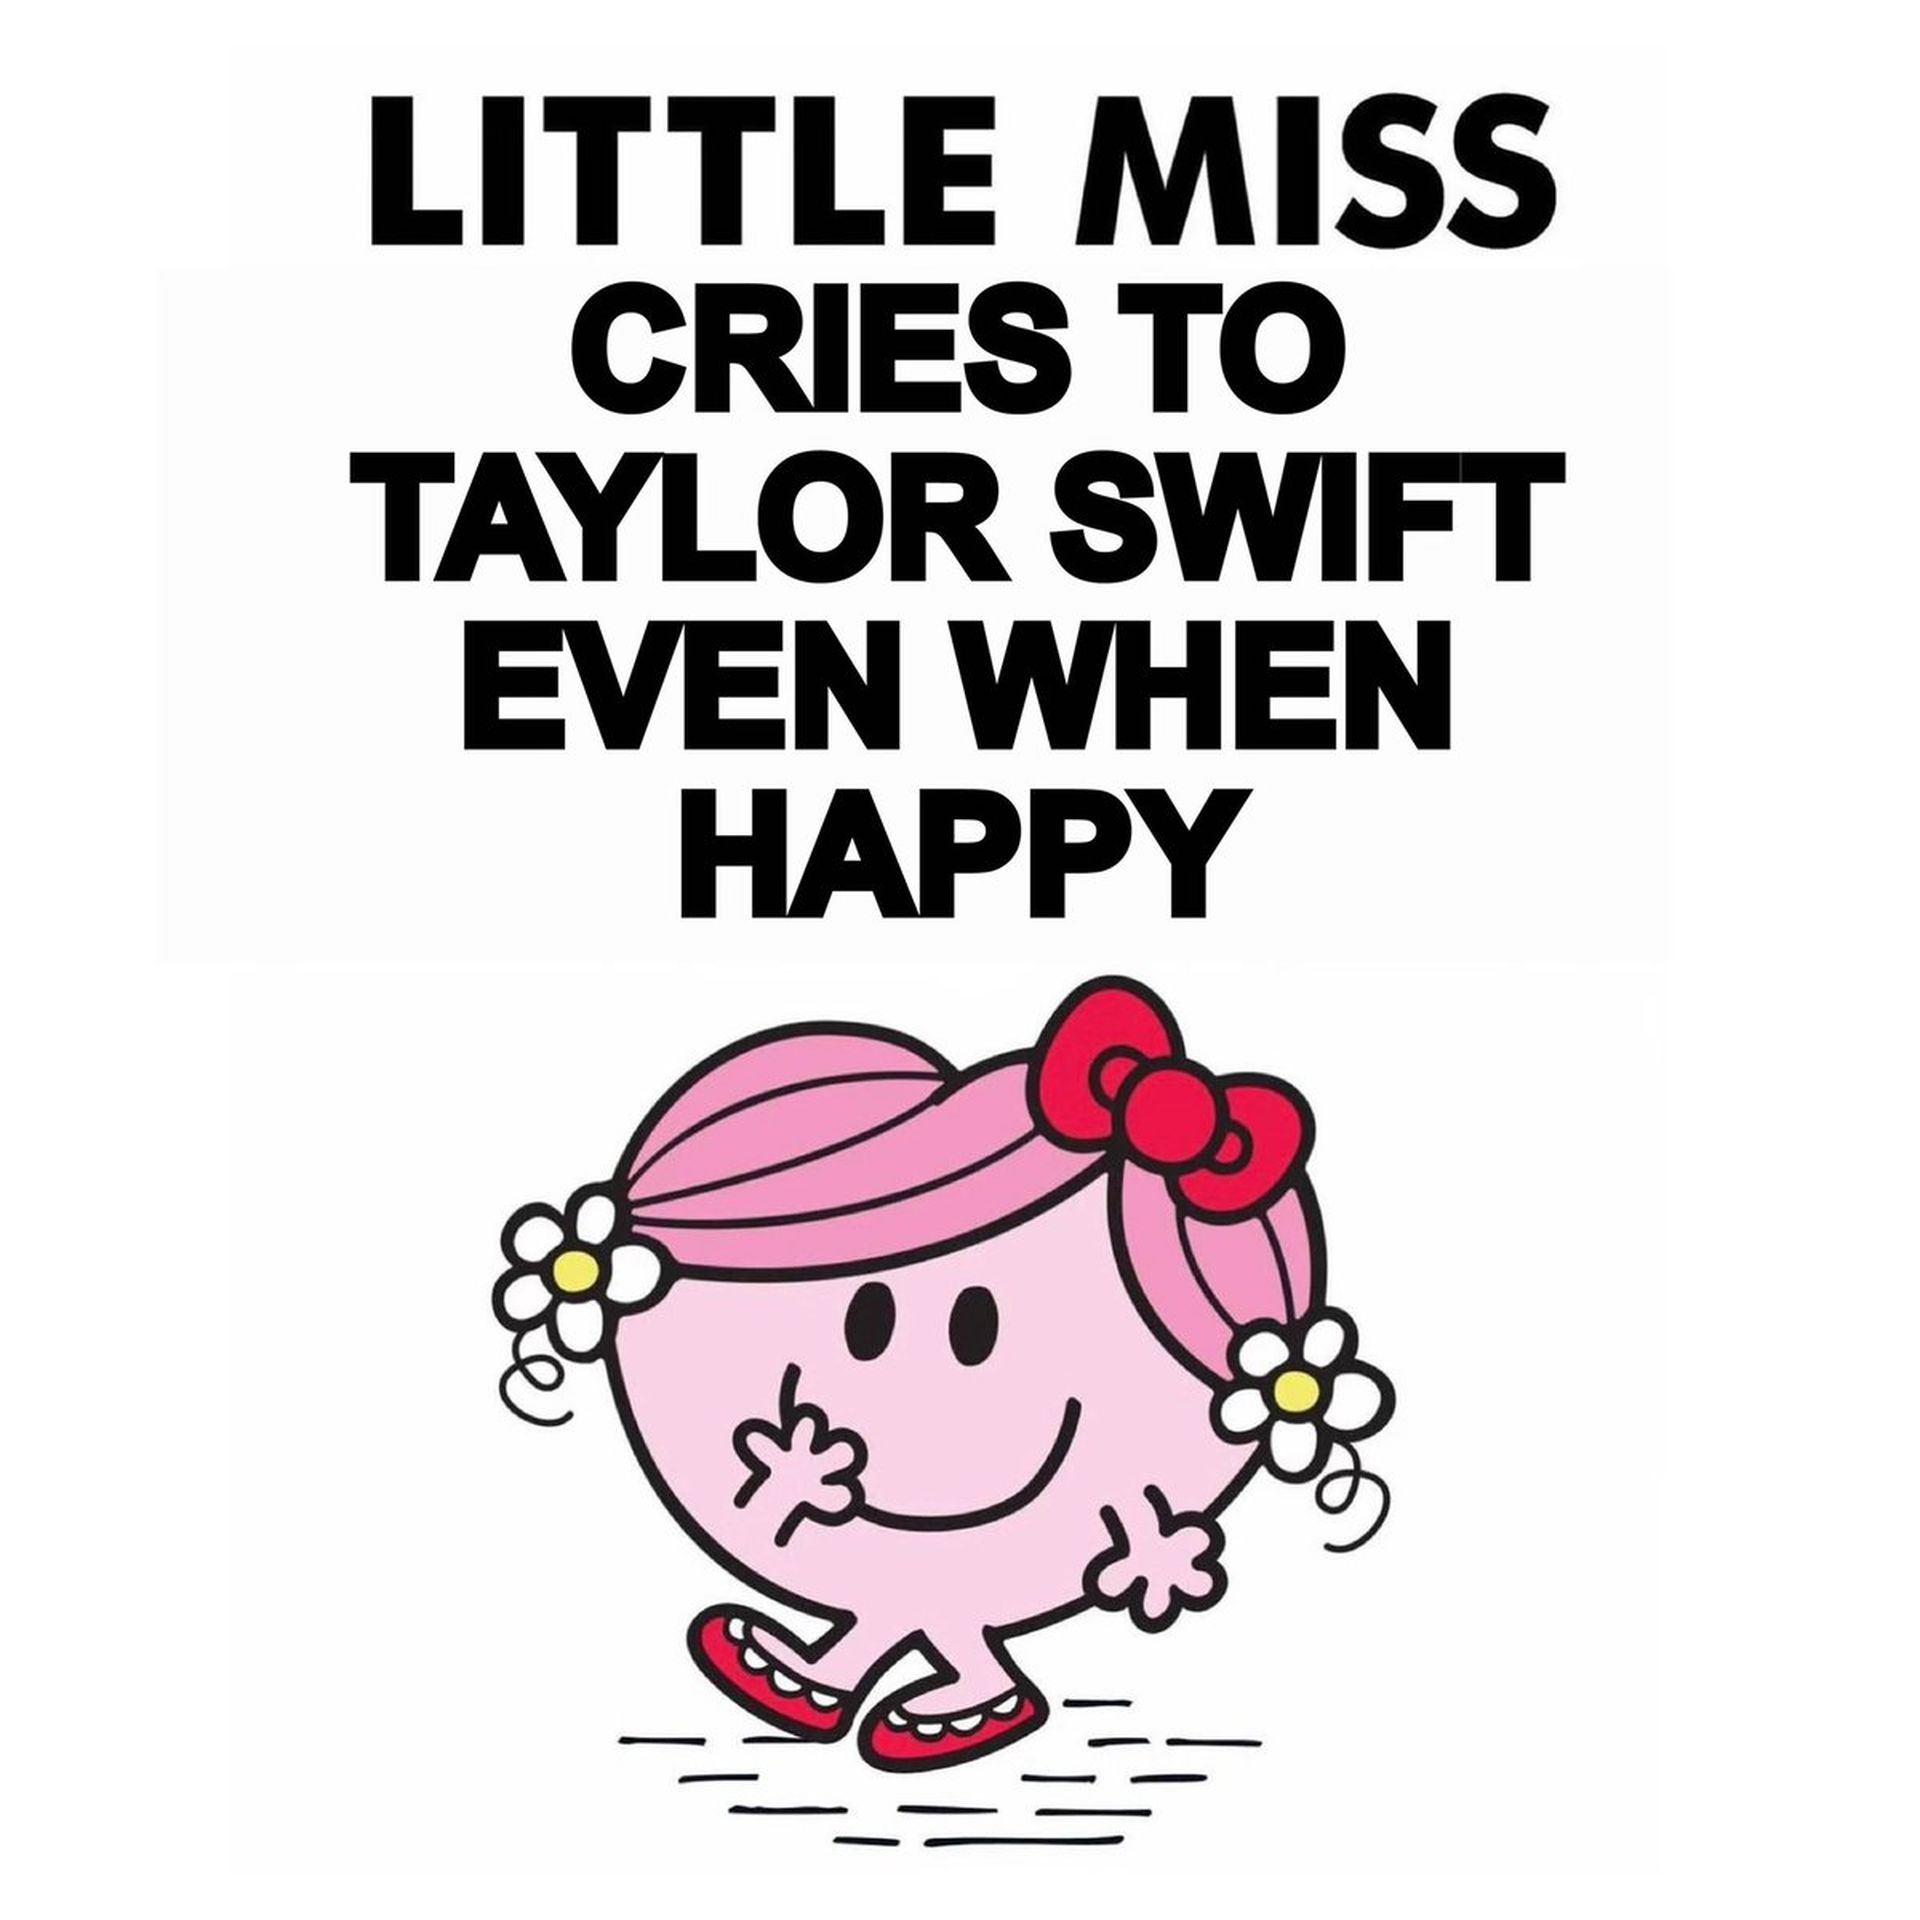 Today we are here to explain the meaning of one of the most fun trends to date, Little Miss memes. We are going to explain where do the Little Miss memes come from and how to create them. Those who are looking for the best Little Miss memes generators, you’ve come to the right place. If you are wondering the best Little Miss memes on Instagram, below you can find some of the finest examples.